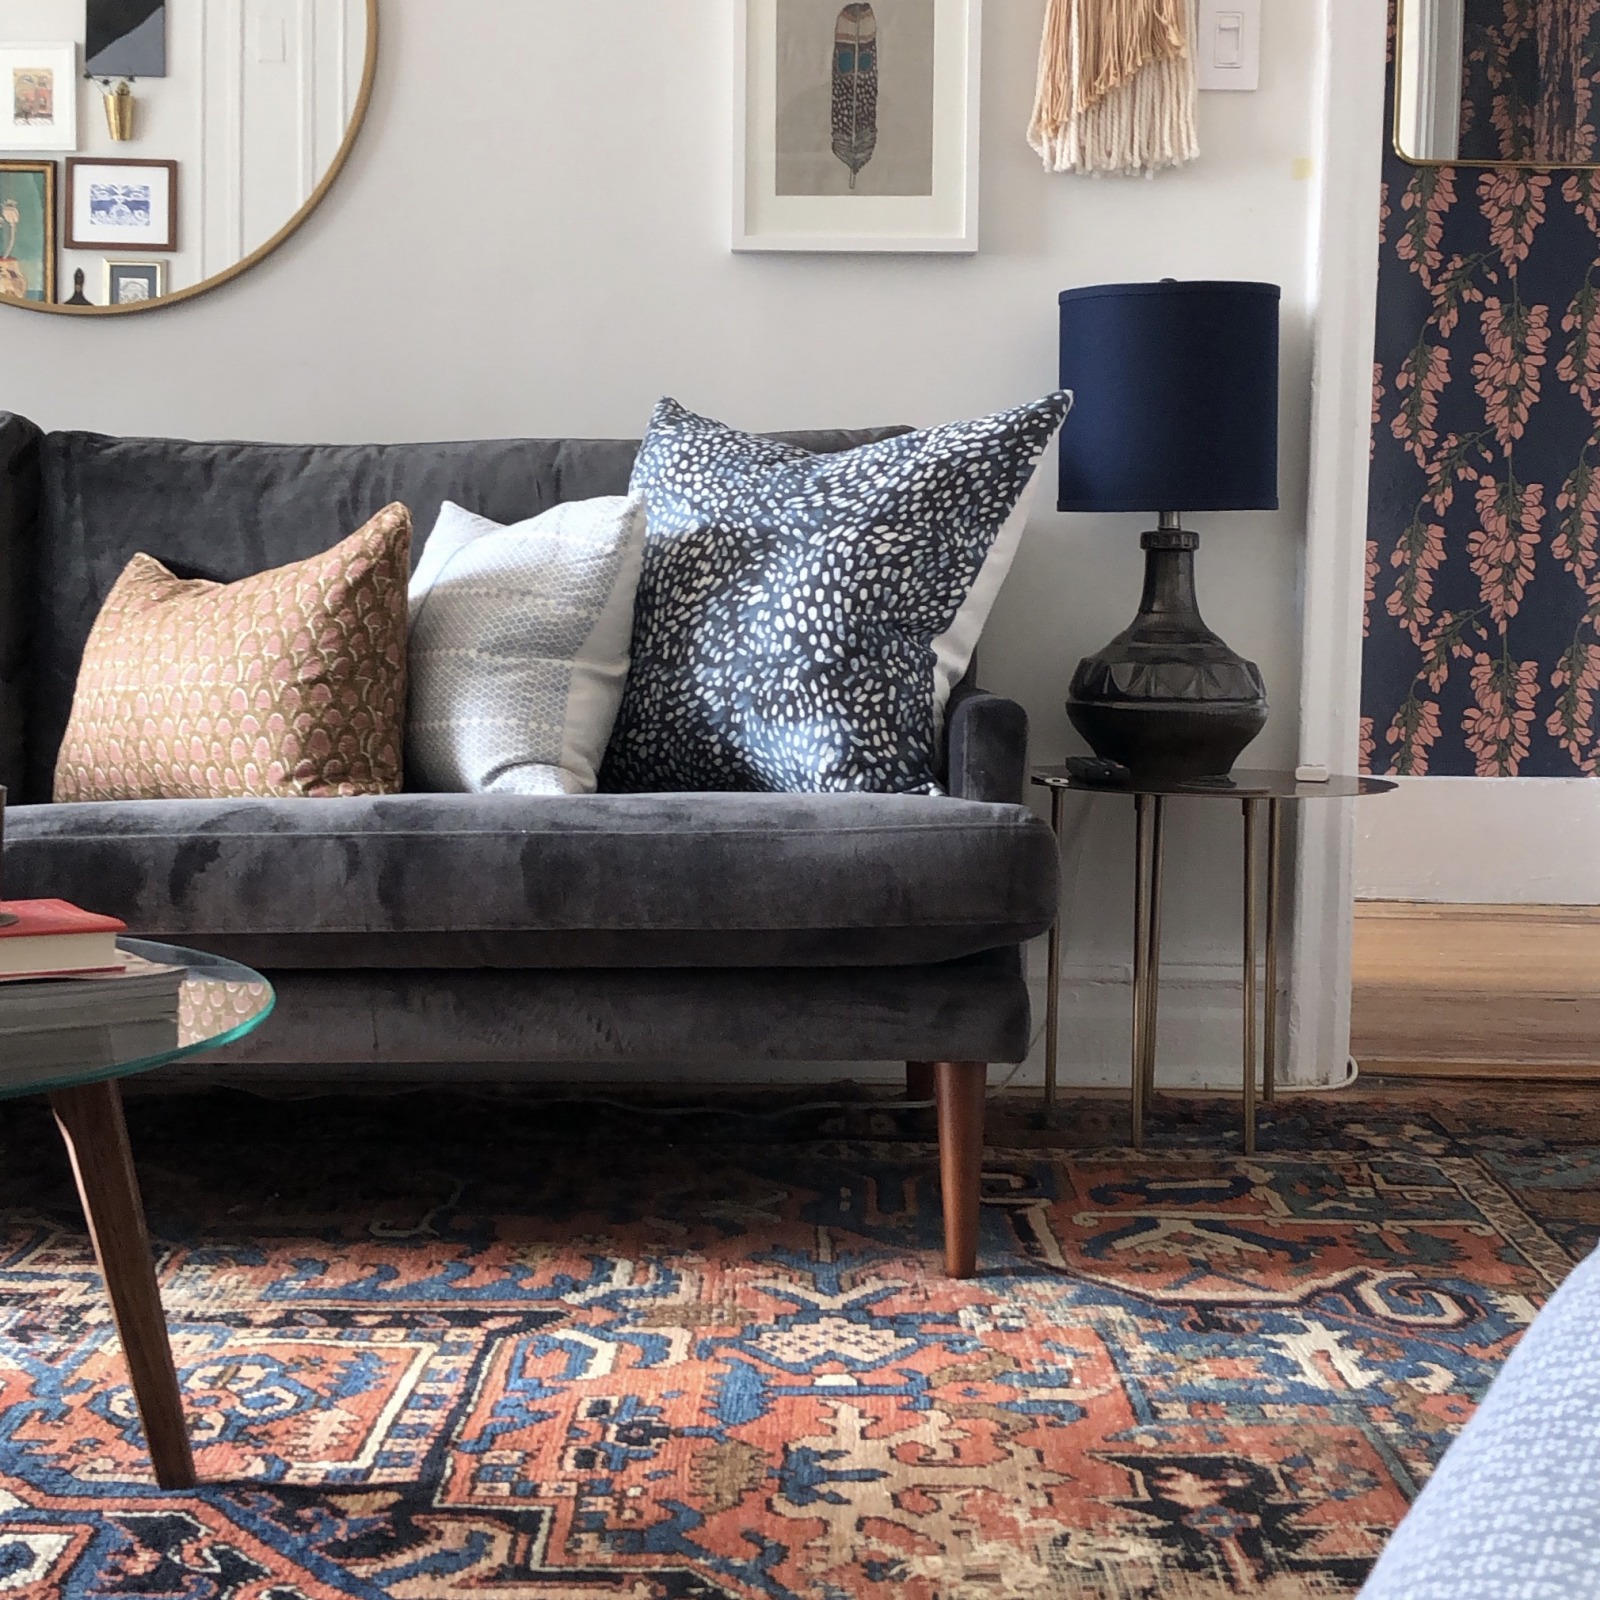 How To Choose The Right Rug For Your, How To Pick A Rug For Your Living Room